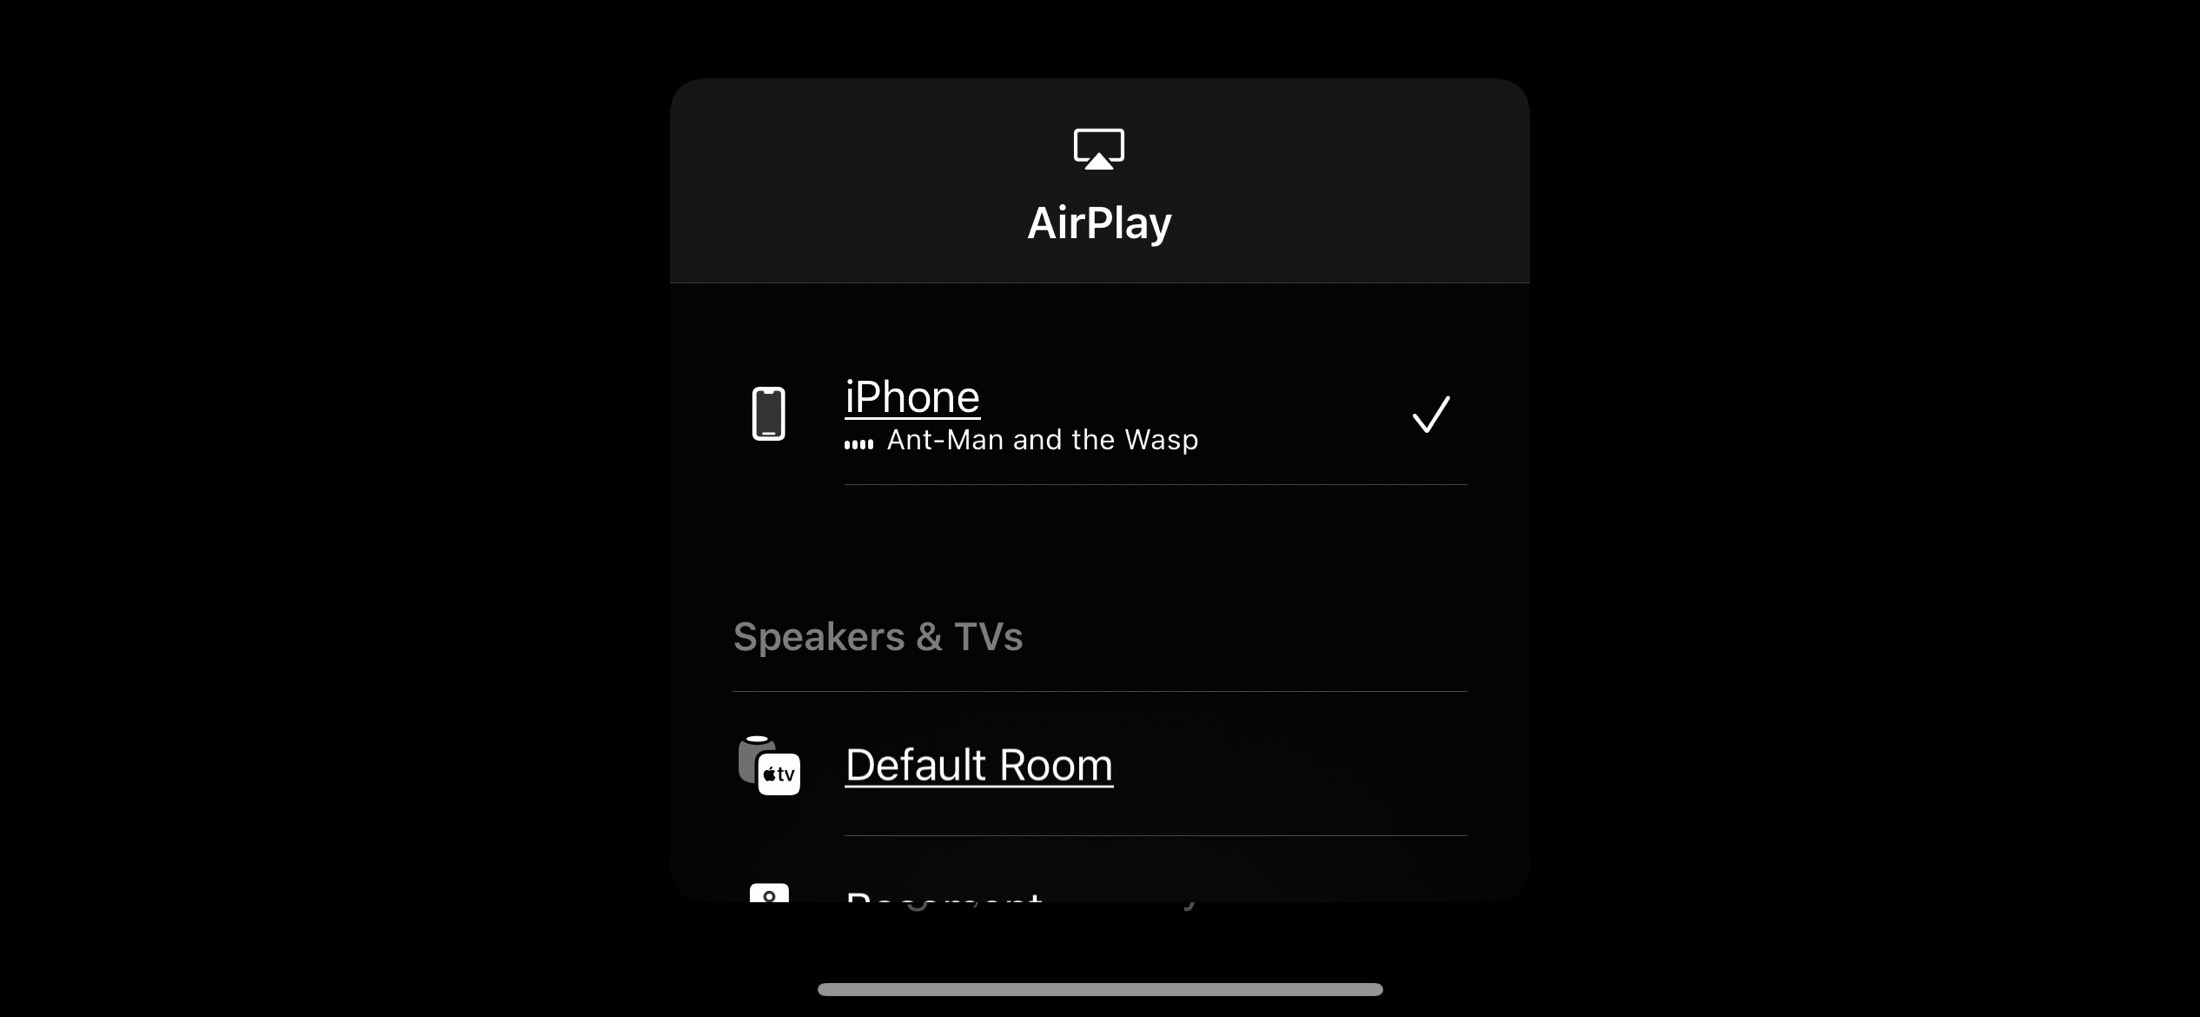 AirPlay video option inside the Disney+ app for iOS.